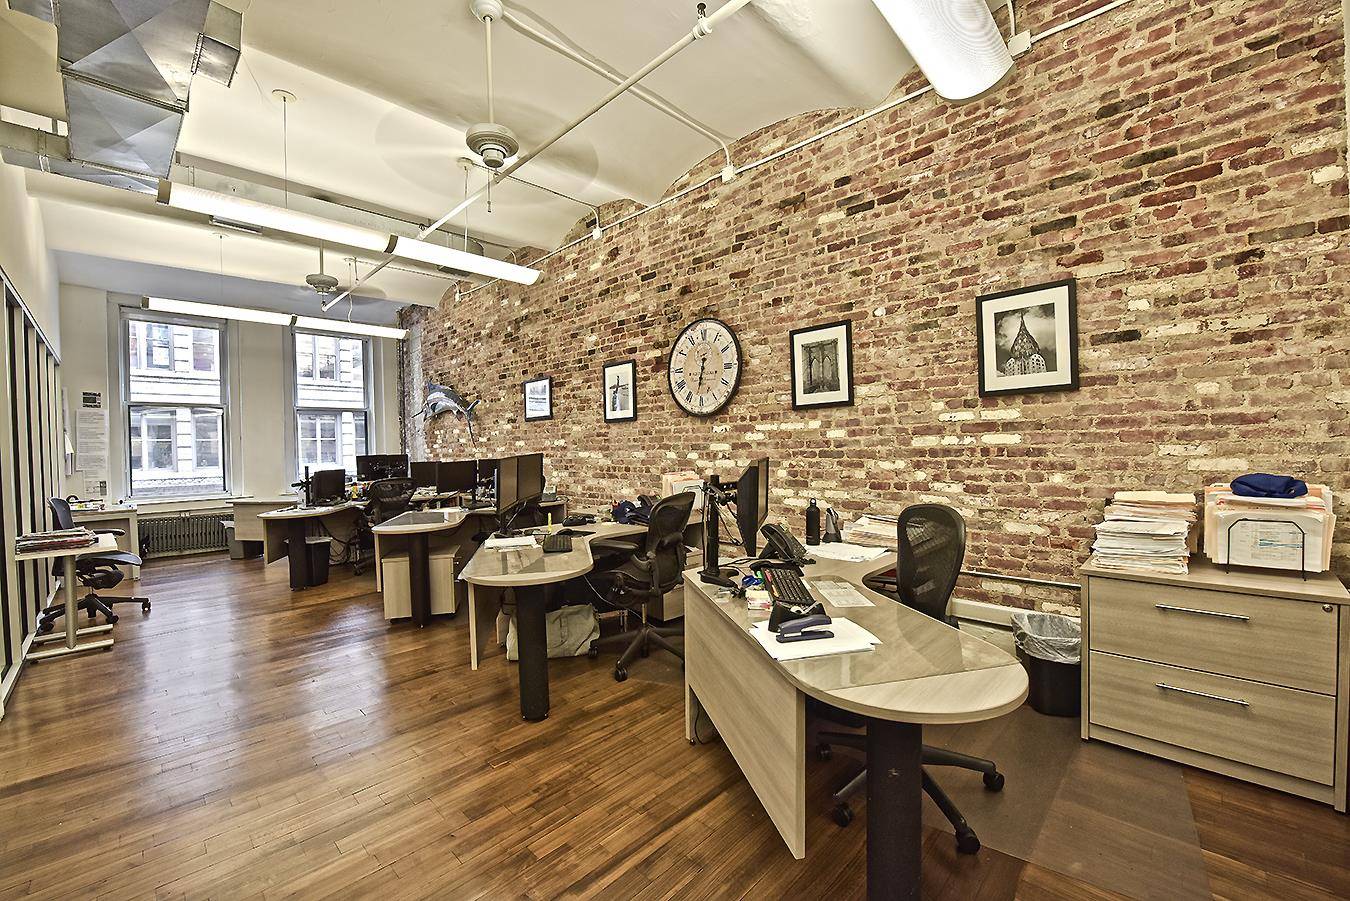 LIVE WORK CONDO LOFT the 4th floor of 11 W 20th St is located in the heart of Flatiron is configured and used as an office, but this full floor ...